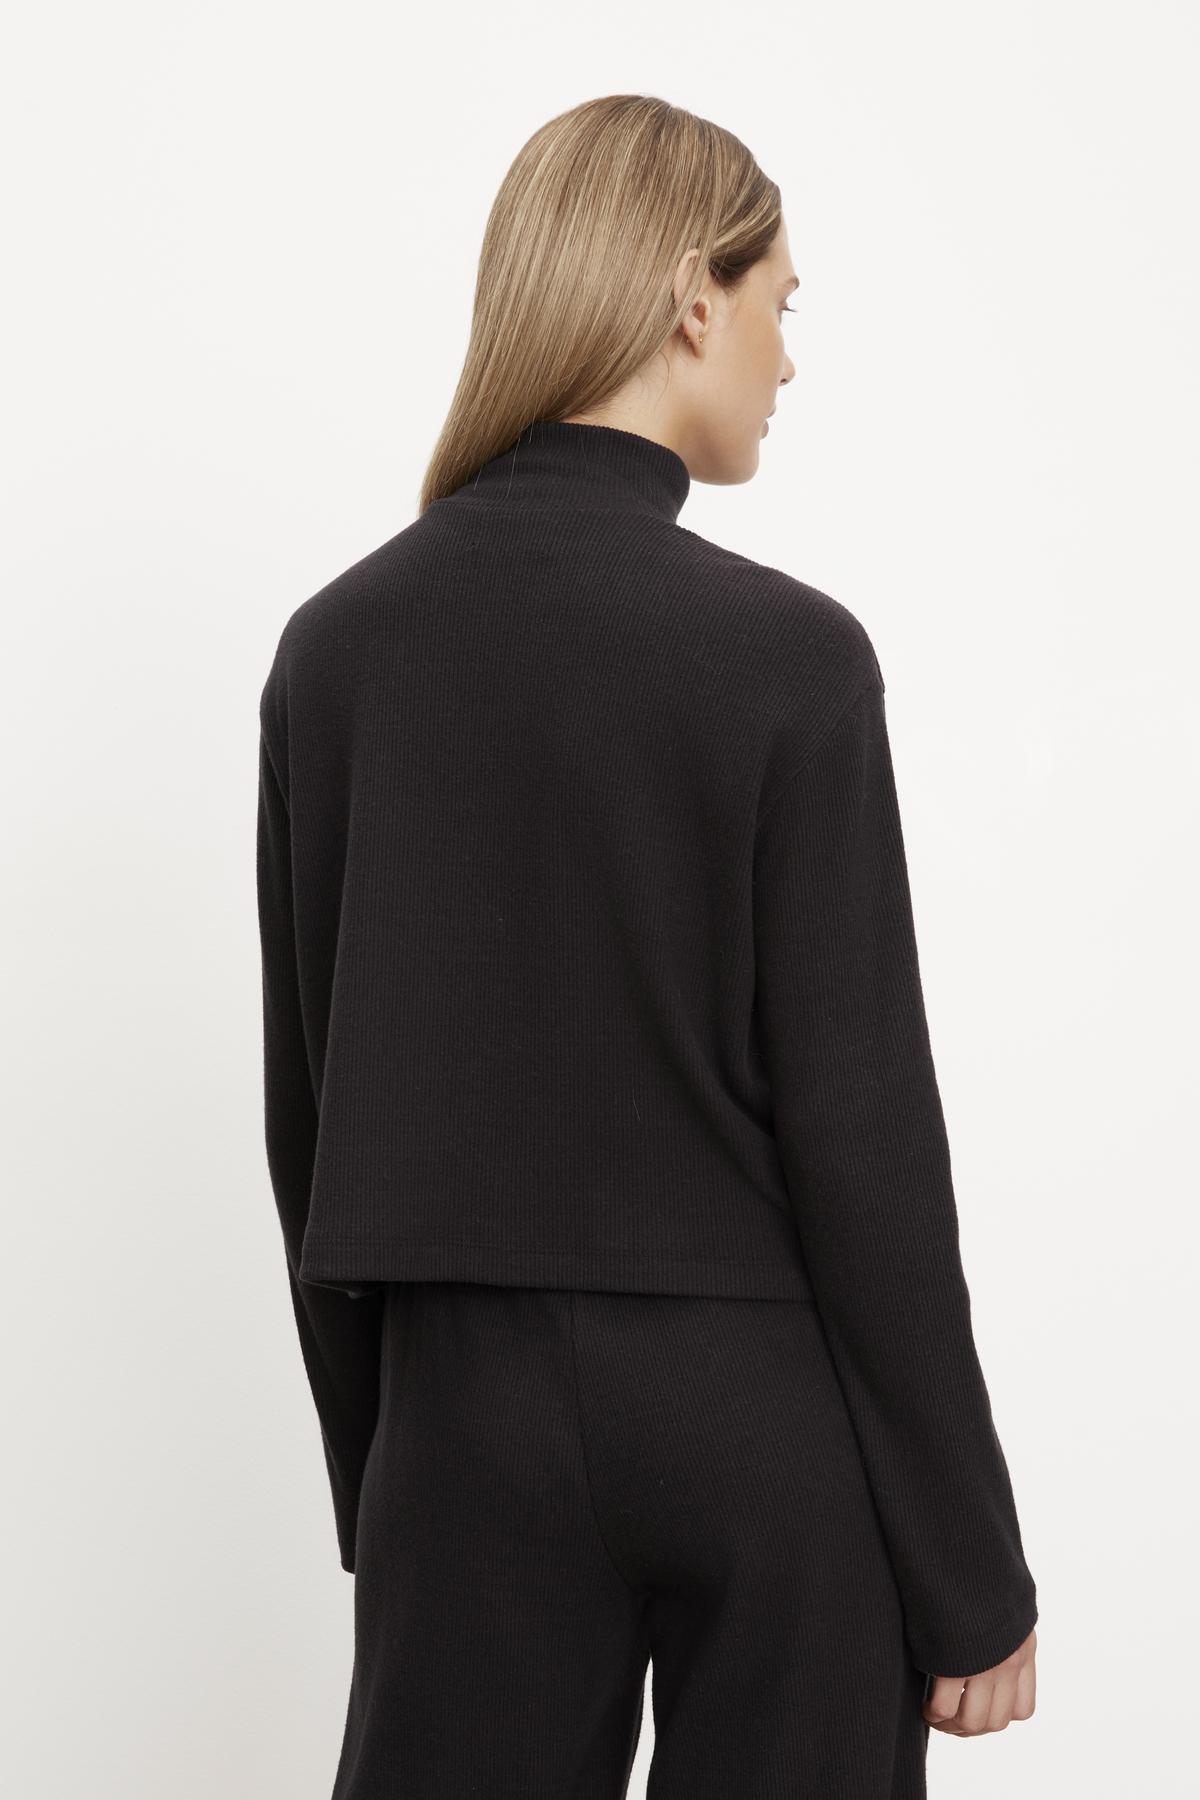   The woman is seen from the back wearing a black ALEC BRUSHED RIB MOCK NECK TOP by Velvet by Graham & Spencer. 